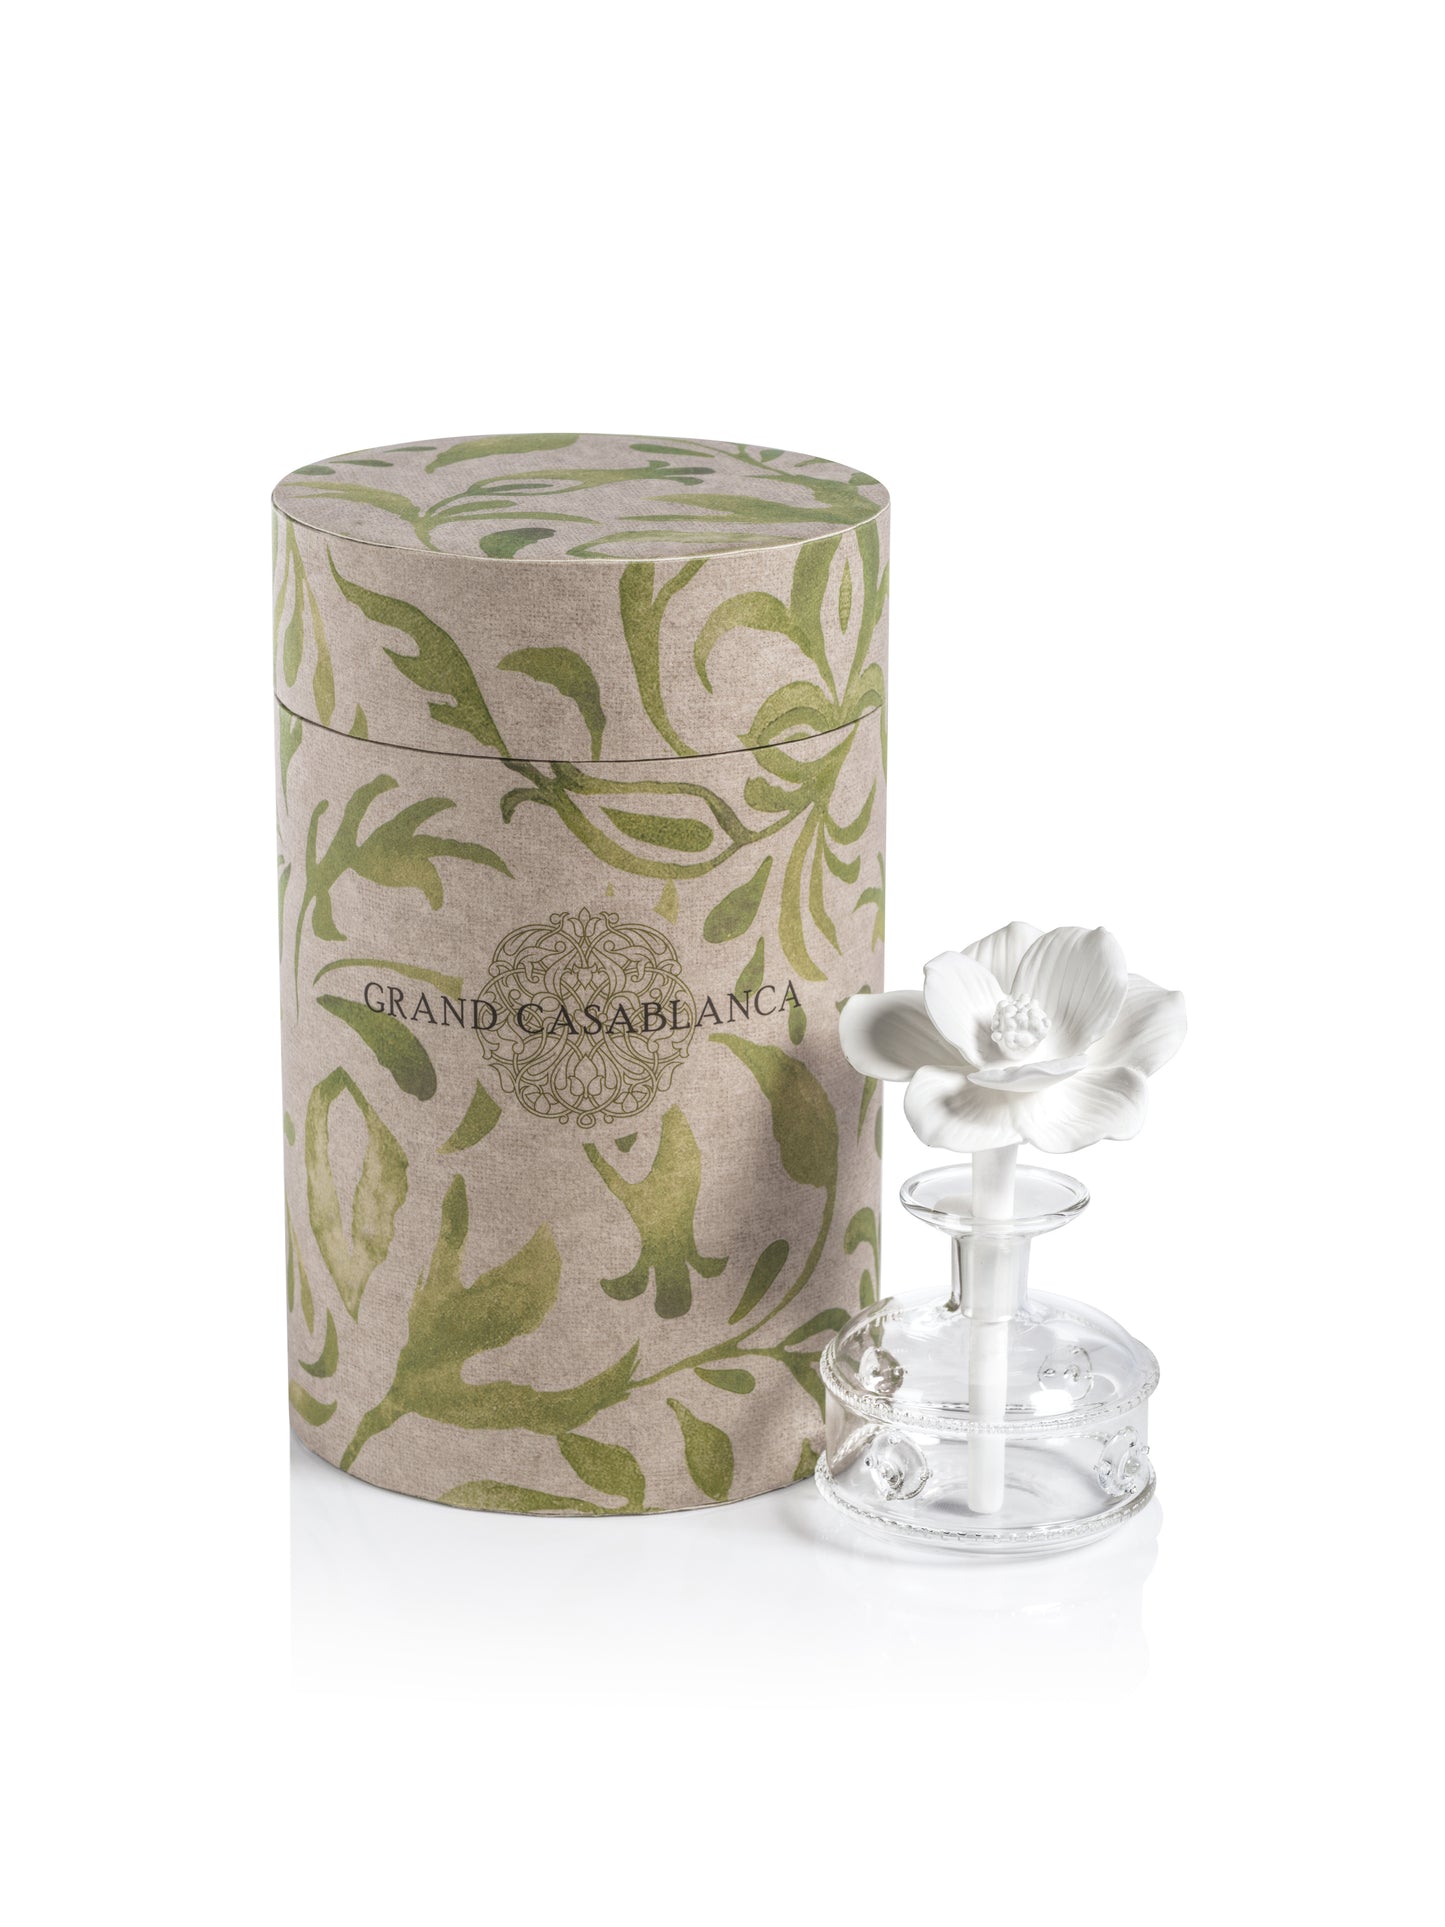 LILY of the VALLEY Zodax MINI Grand Casablanca Porcelain Diffuser